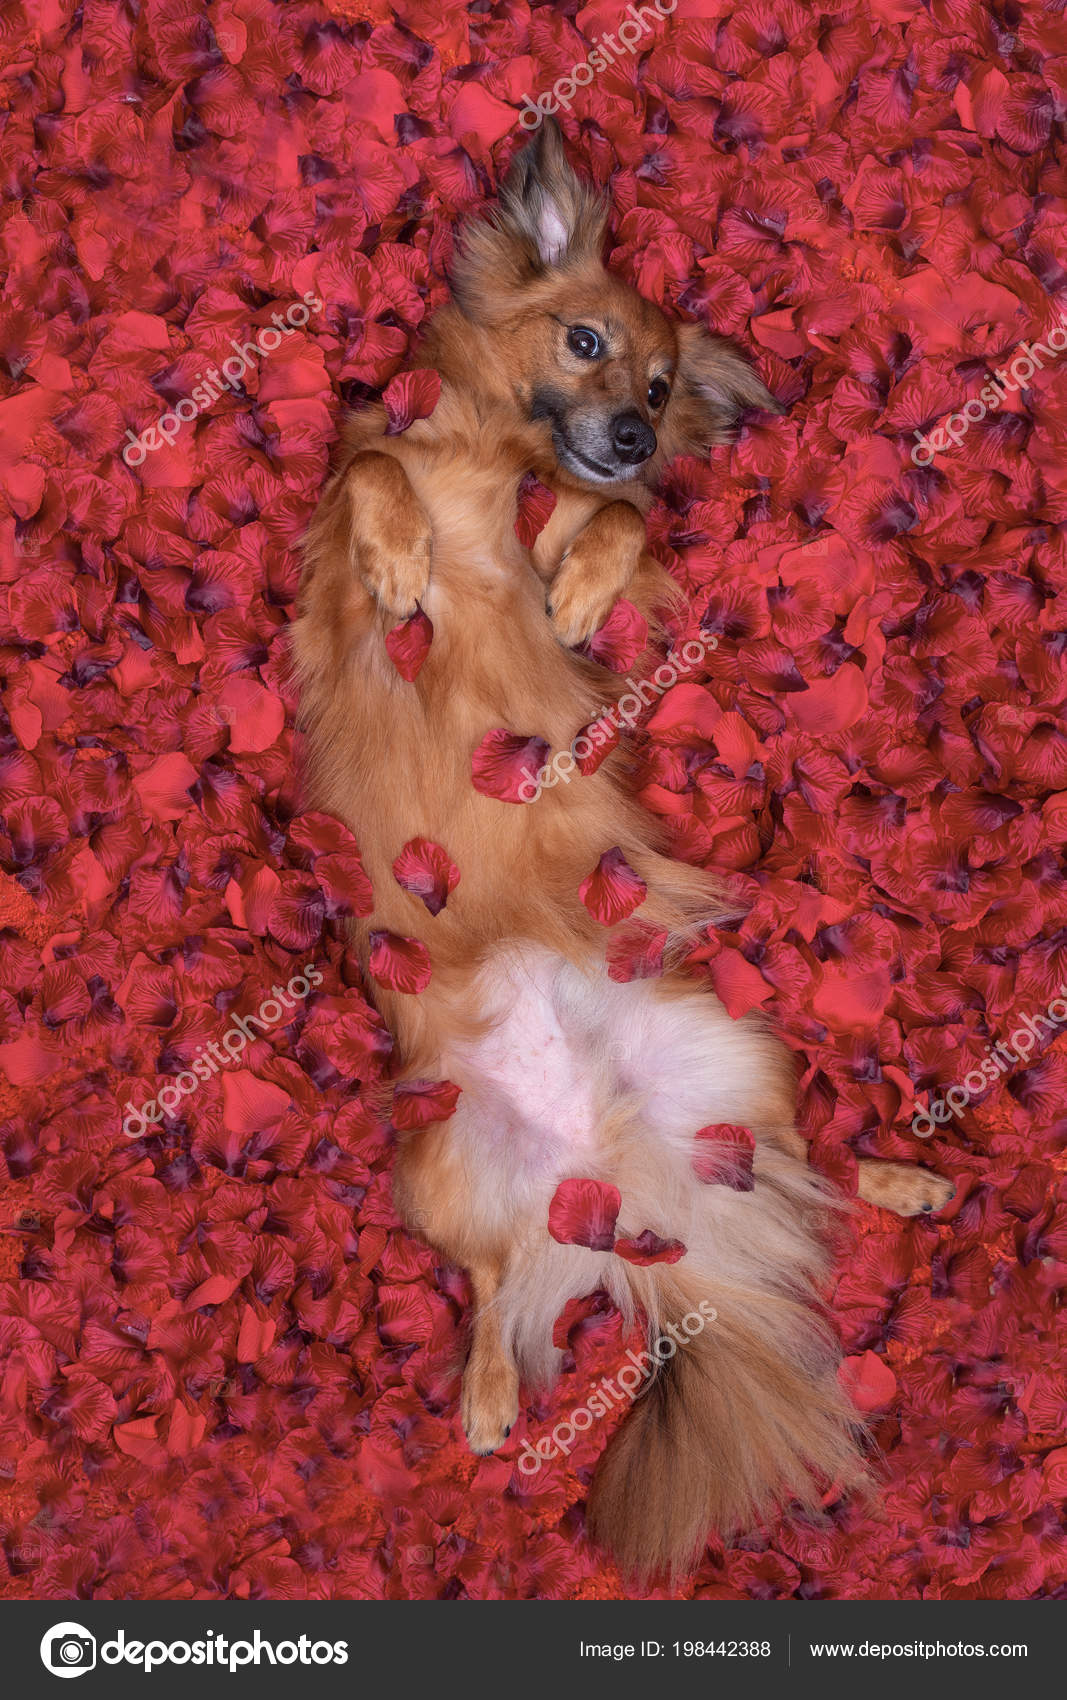 Nice Funny Dog Lying Bed Full Red Flower Petals Background Stock Photo Image By C Maforche